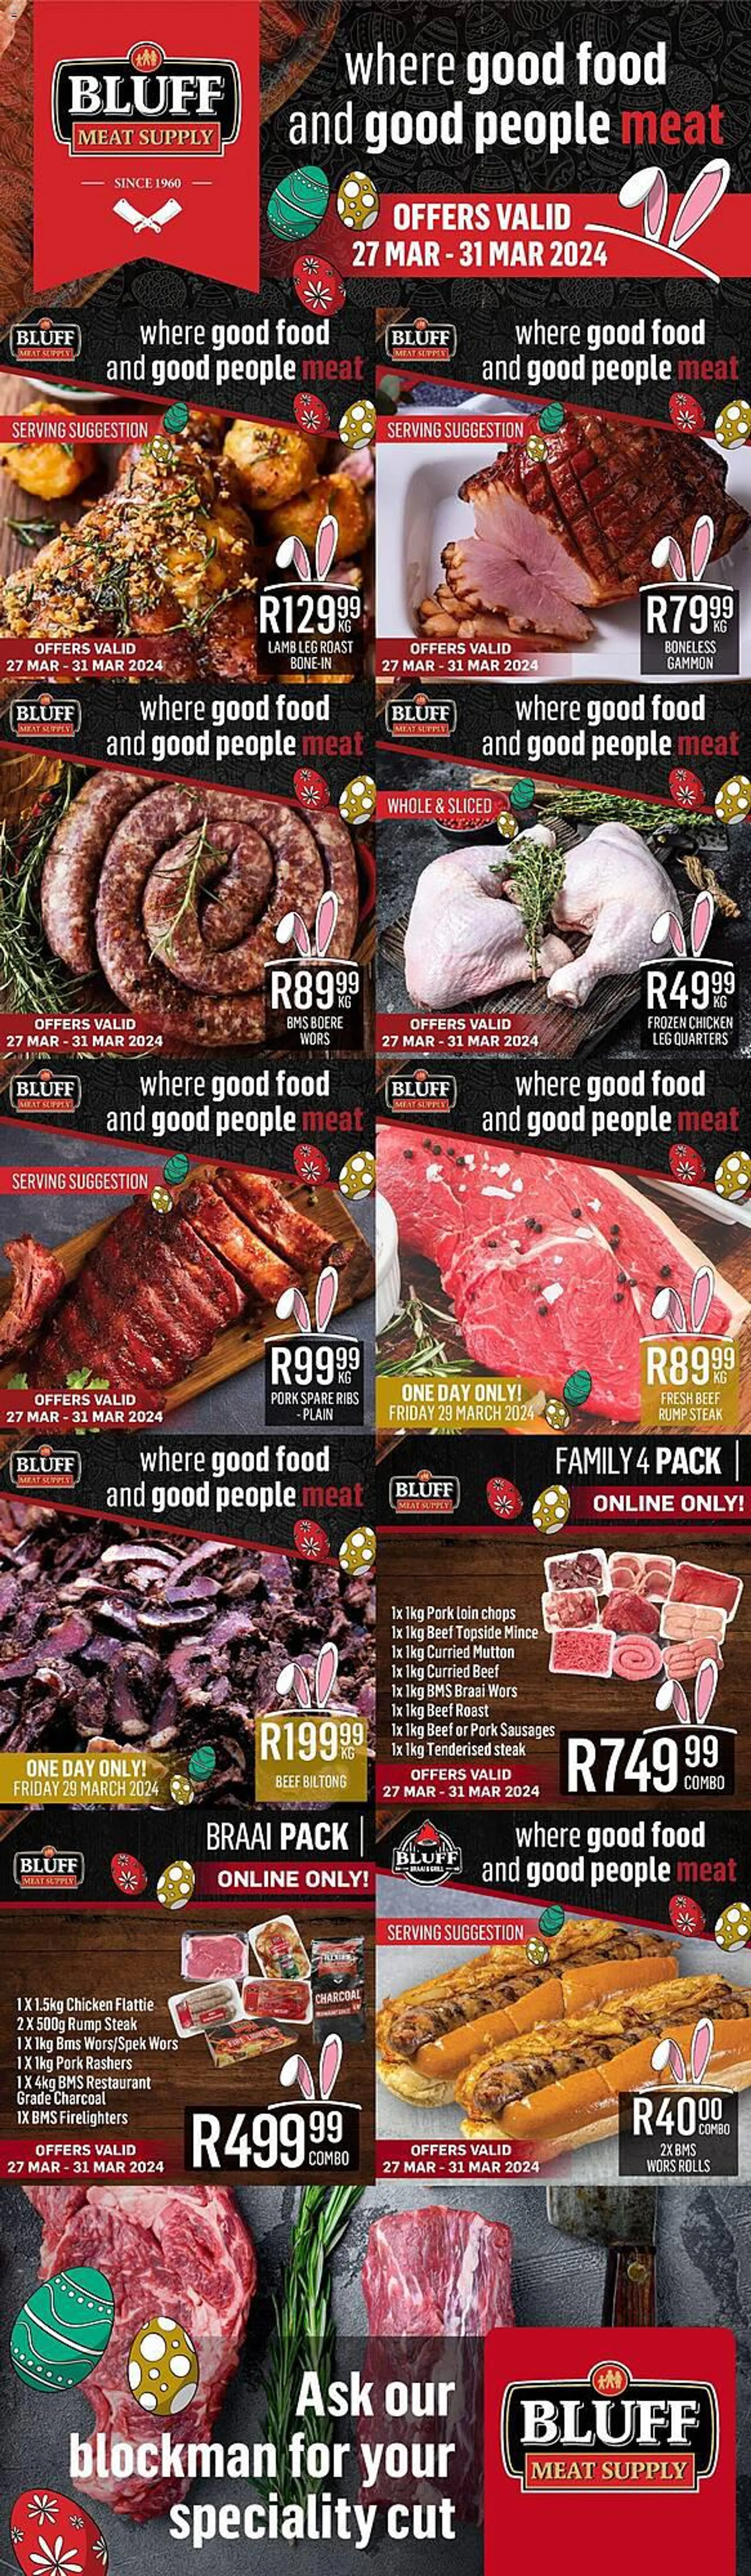 Bluff Meat Supply catalogue - 27 March 31 March 2024